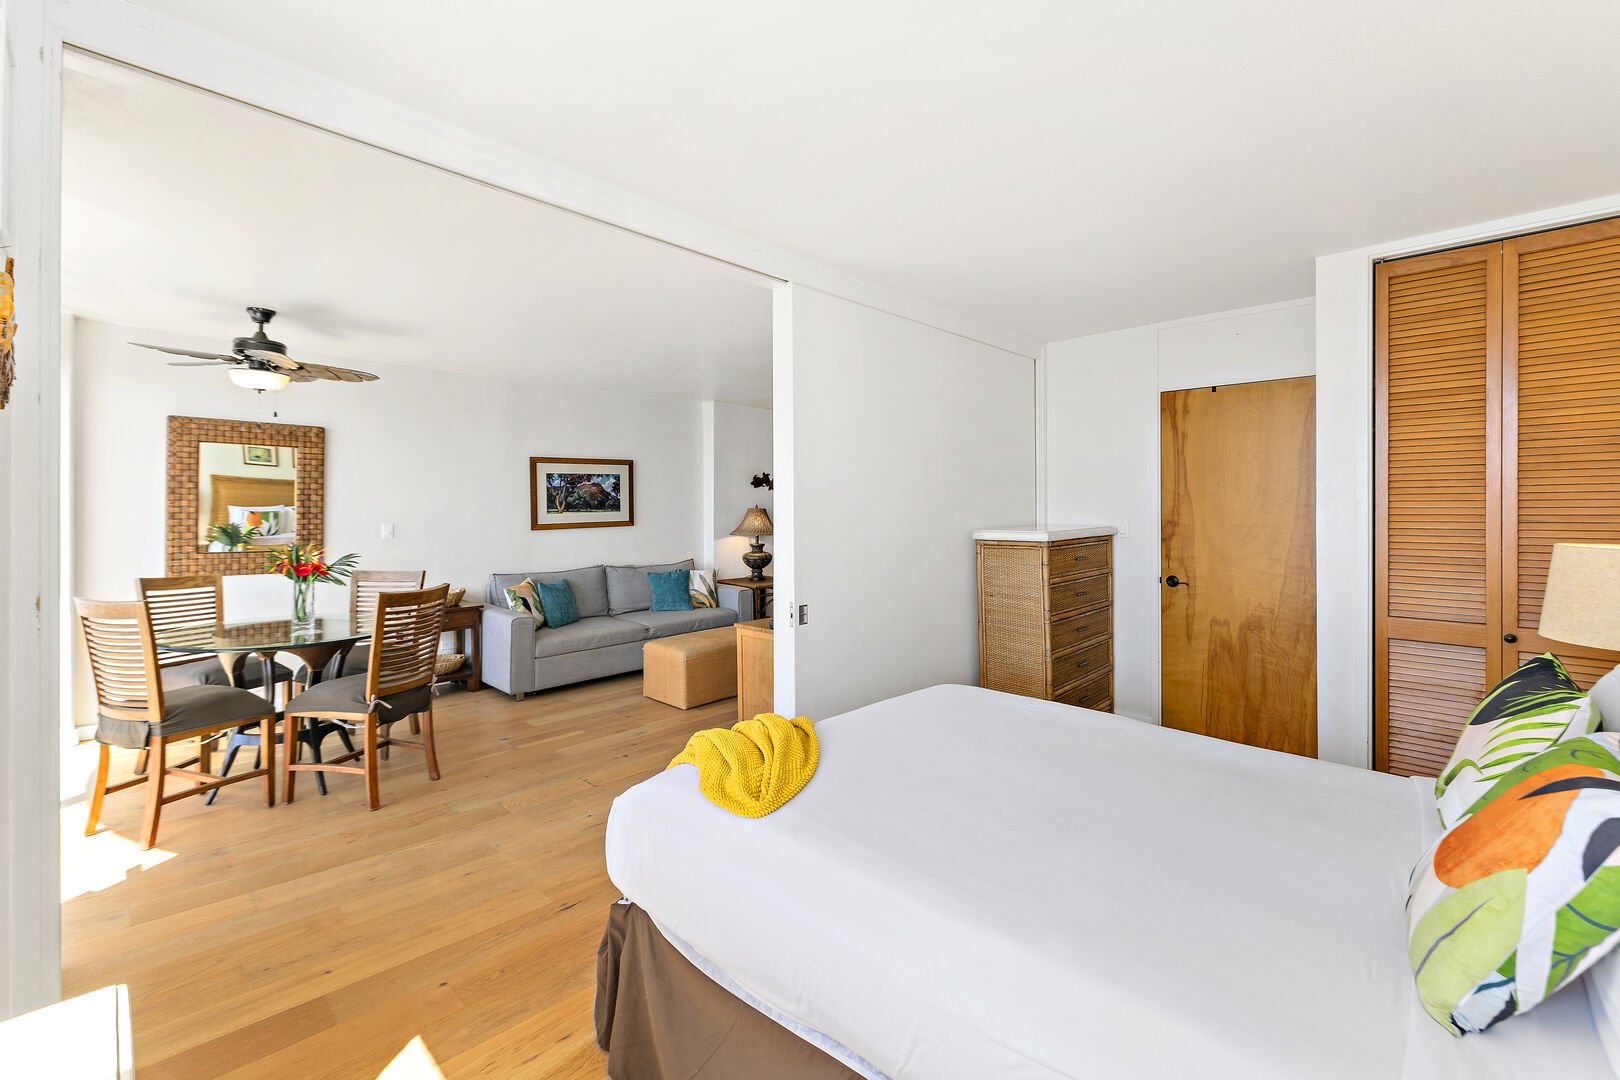 Queen-size bed. A sliding door separates the two ambiances. Access to the bathroom